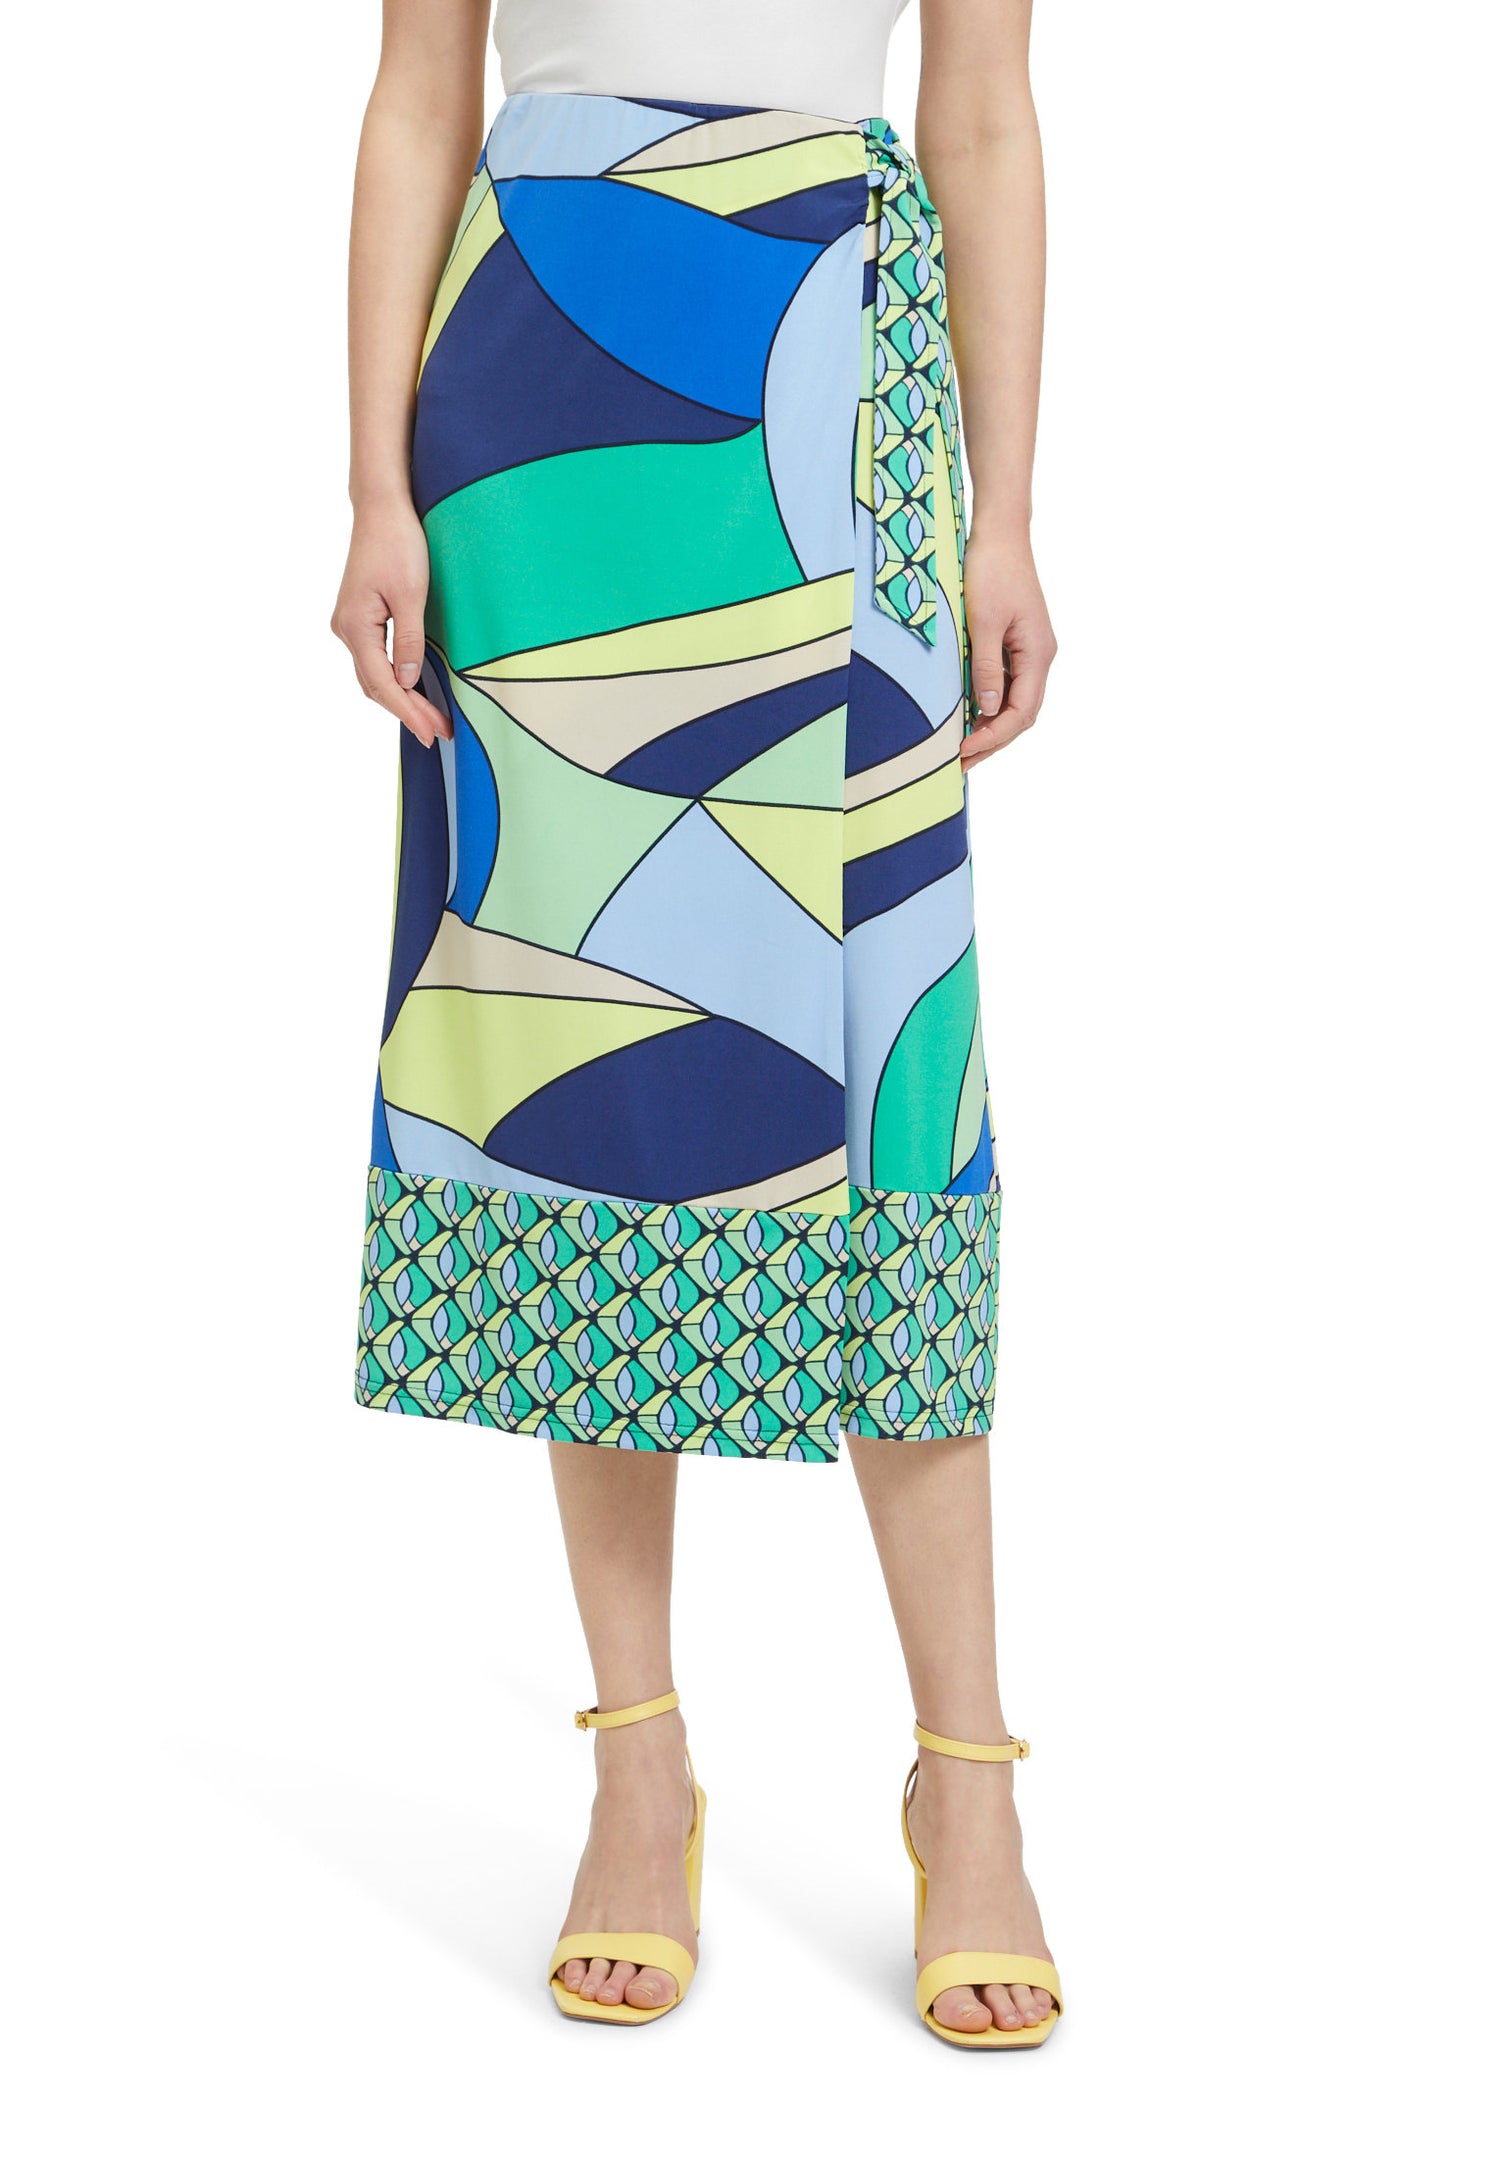 Midi Skirt With All Over Print_9355 2506_8850_03